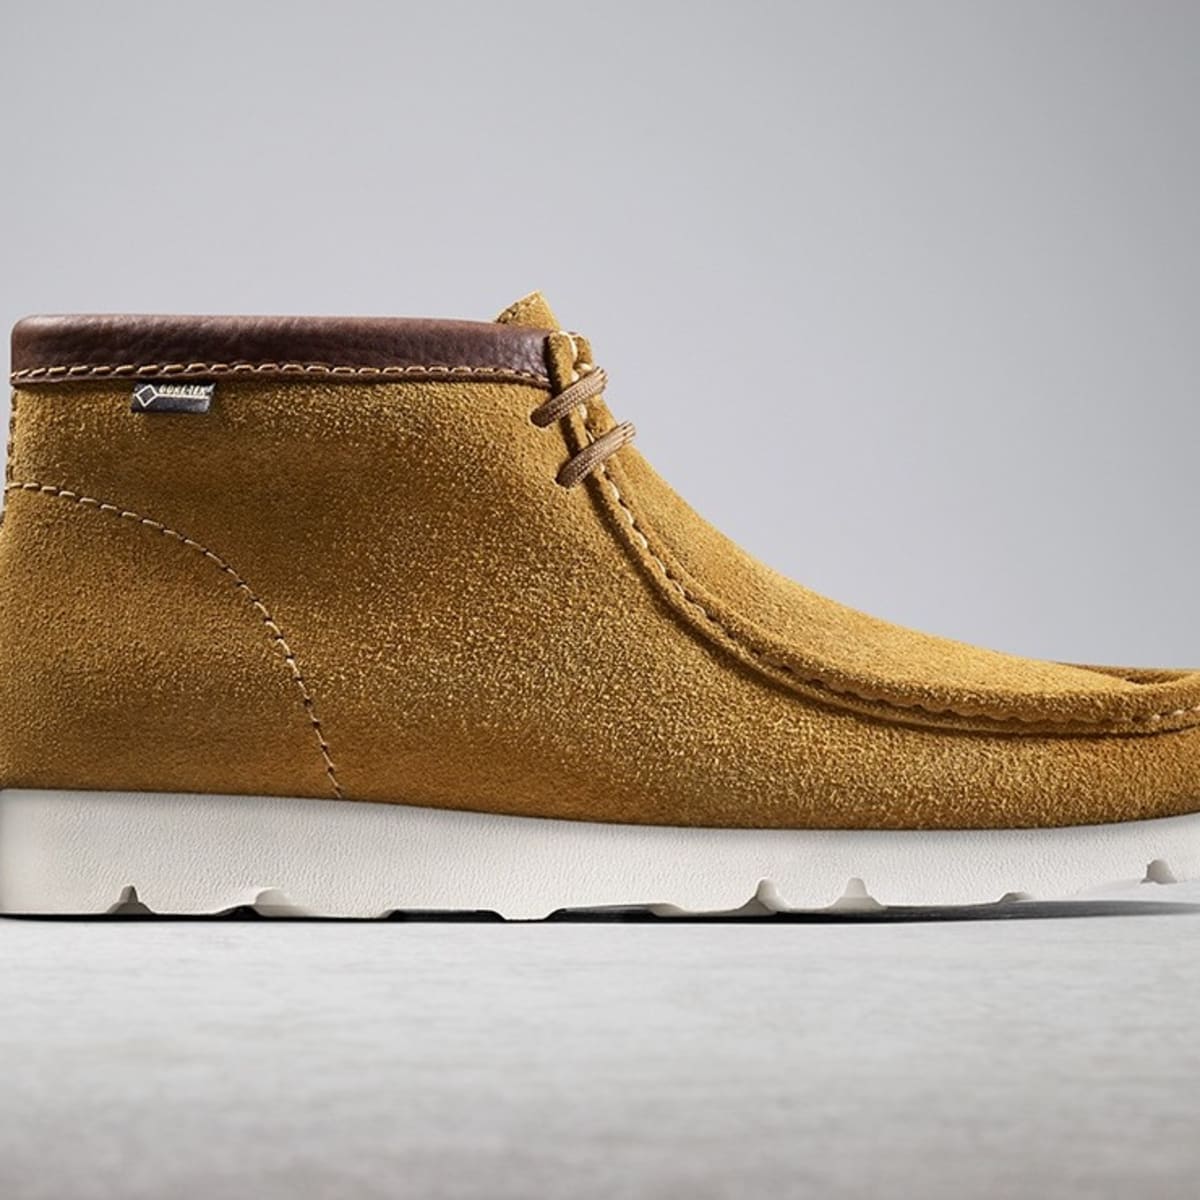 Clarks Originals gets the Wallabee ready for winter - Acquire